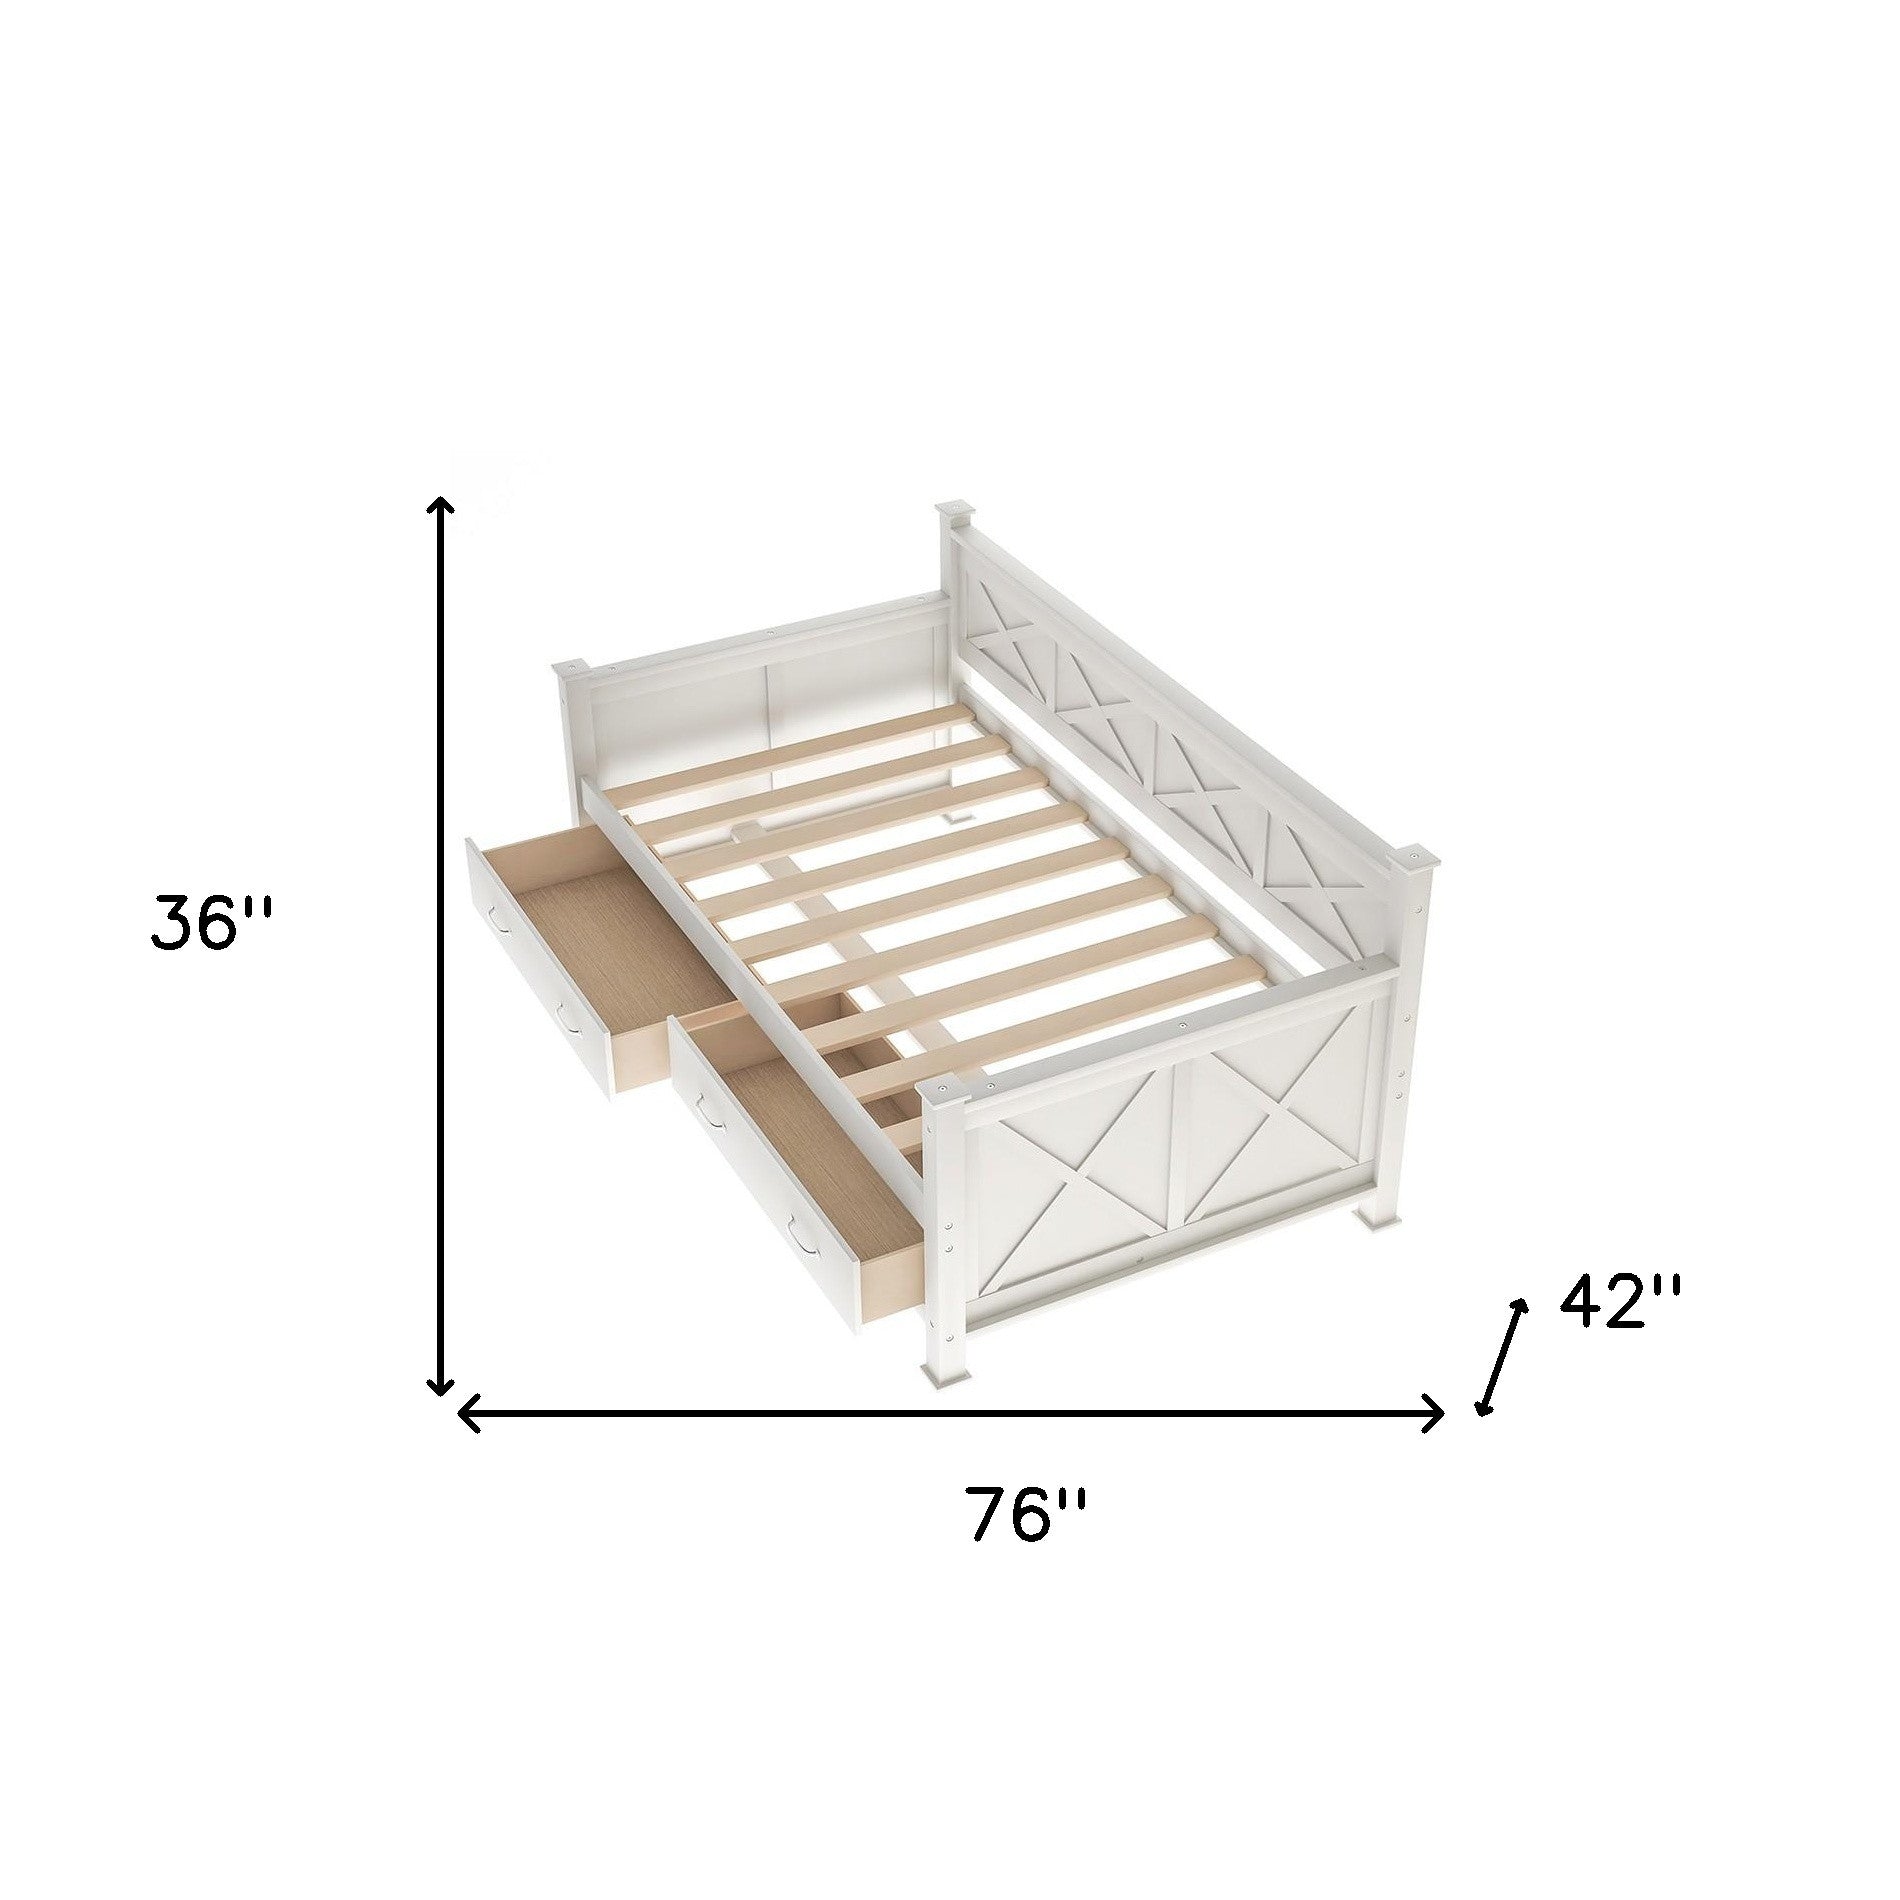 White Twin Two Drawers Bed